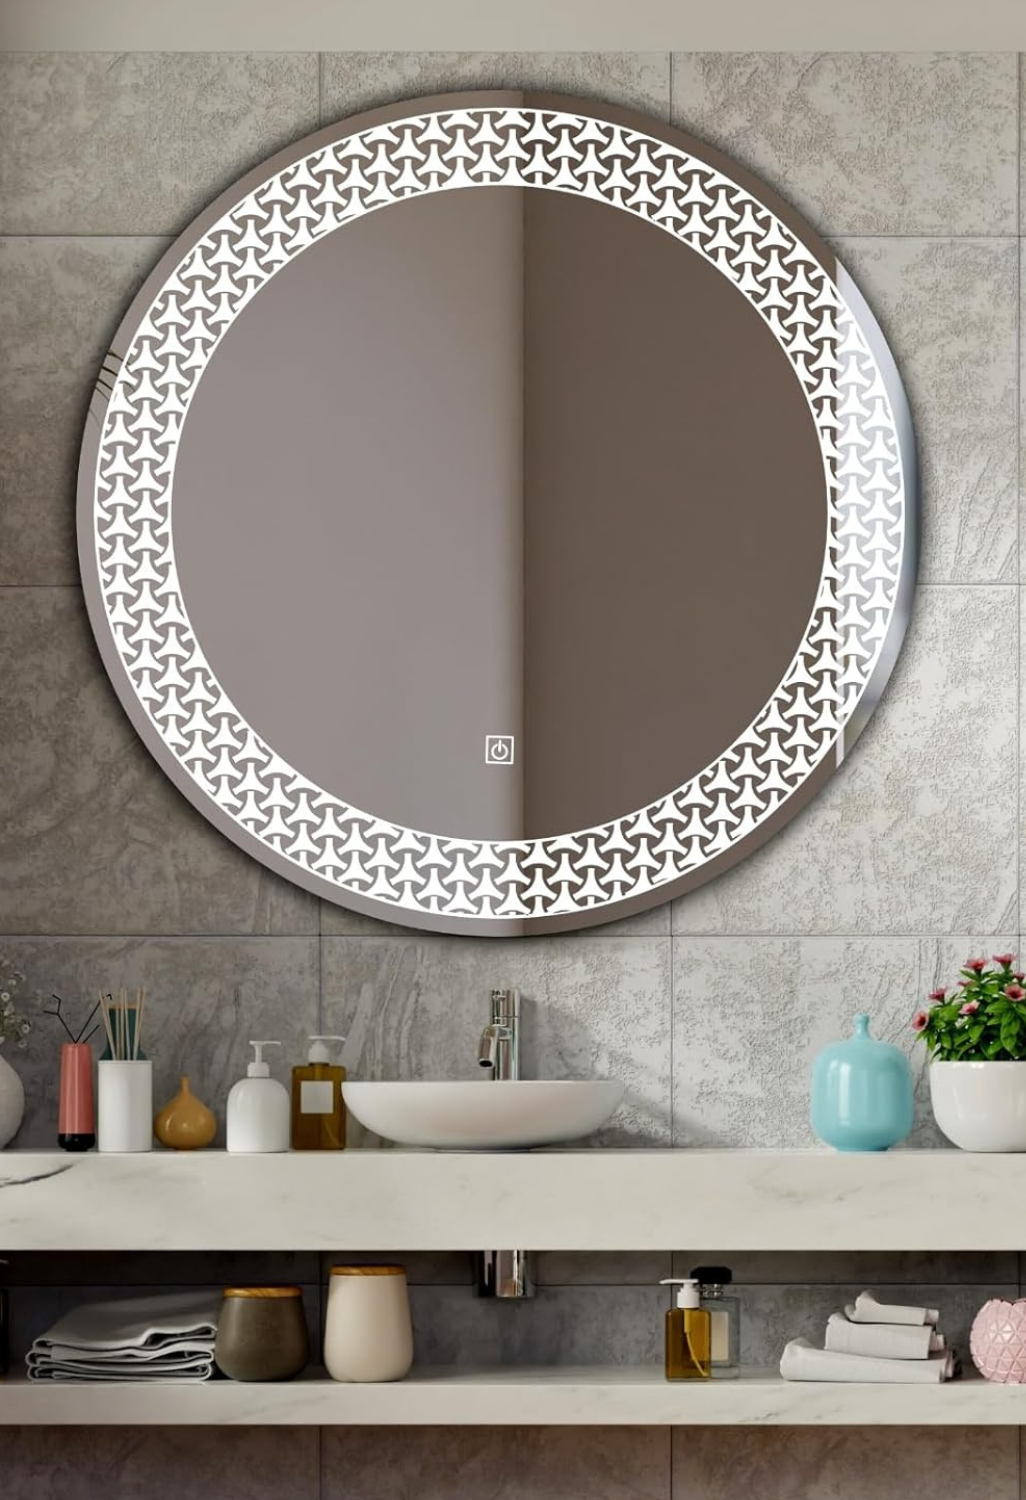 "Sleek Round LED Bathroom Mirror with Touch Sensor: Illuminate Your Space with Style"